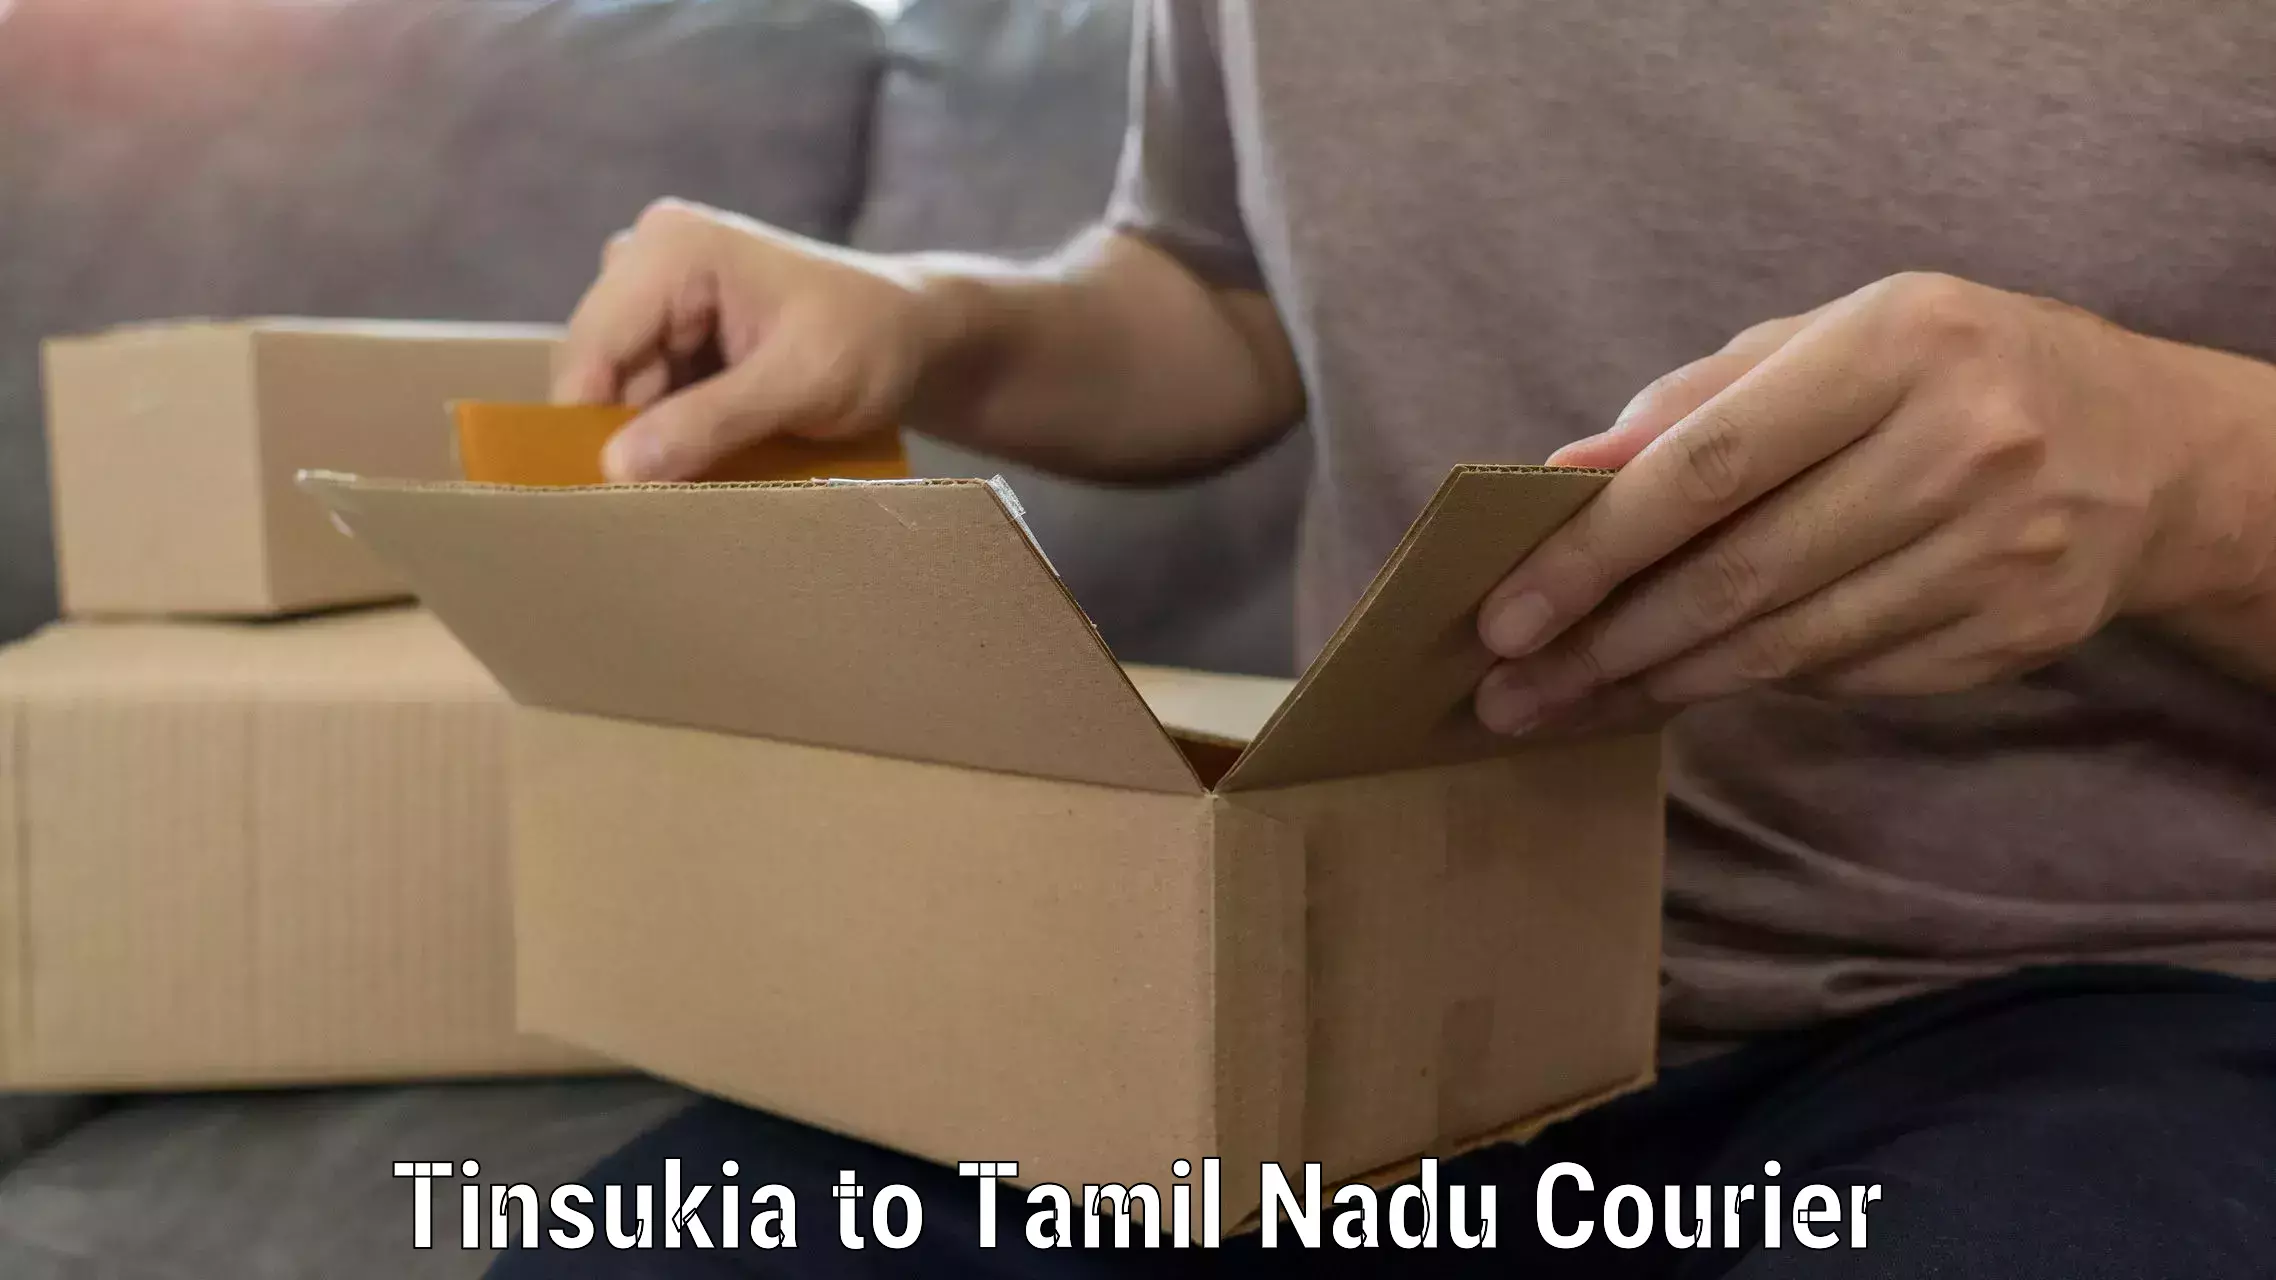 Reliable relocation services Tinsukia to Trichy